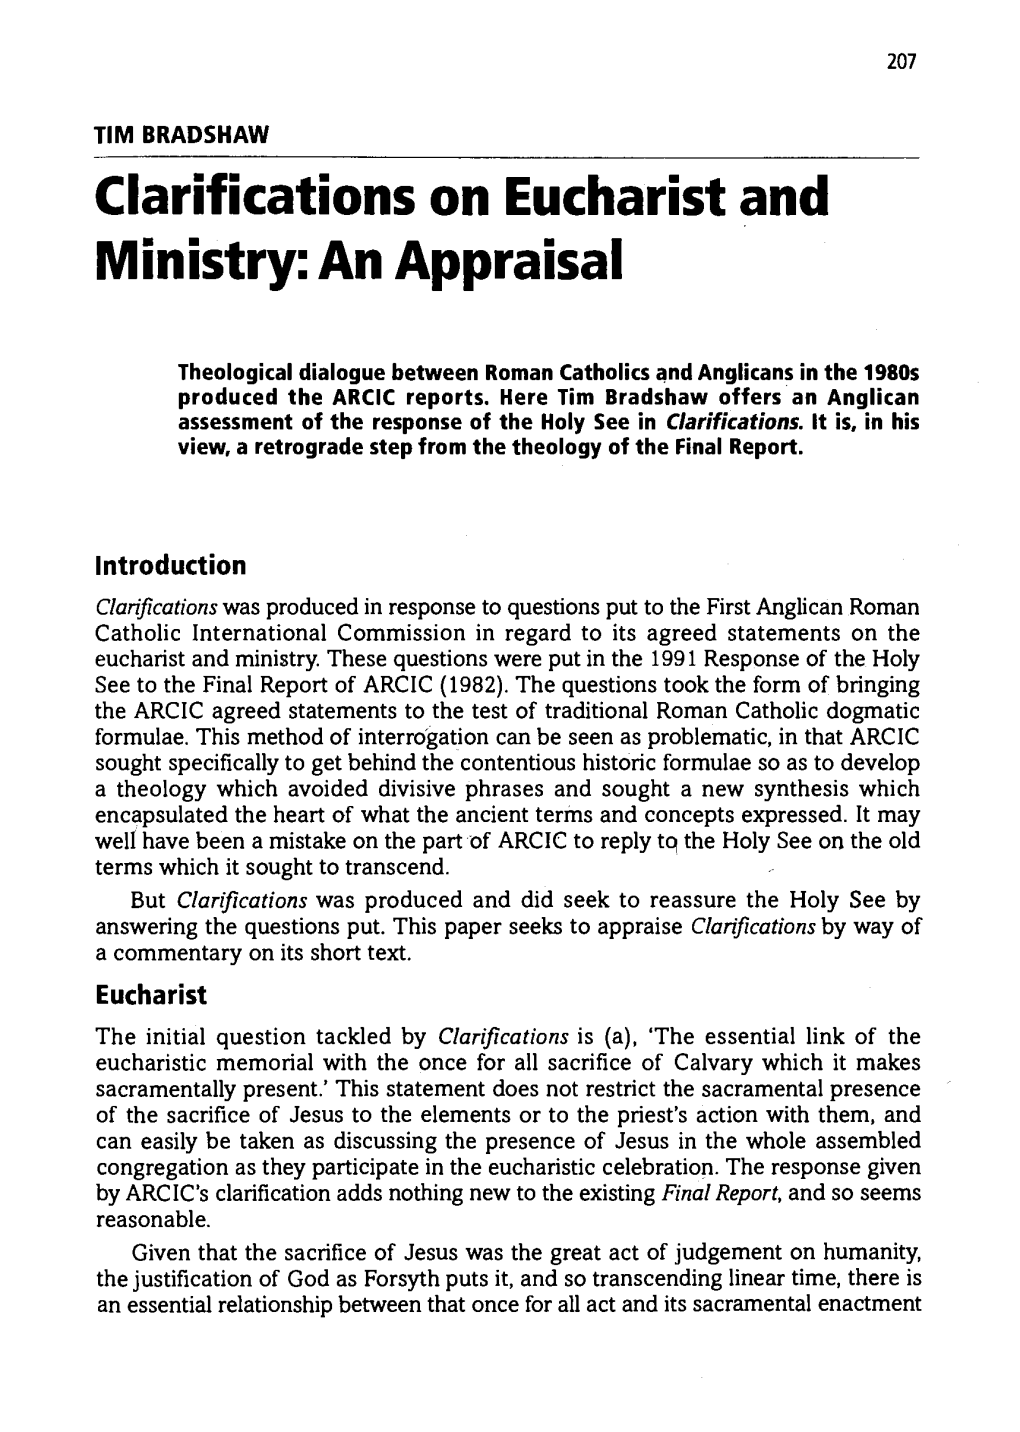 Clarifications on Eucharist and Ministry: an Appraisal